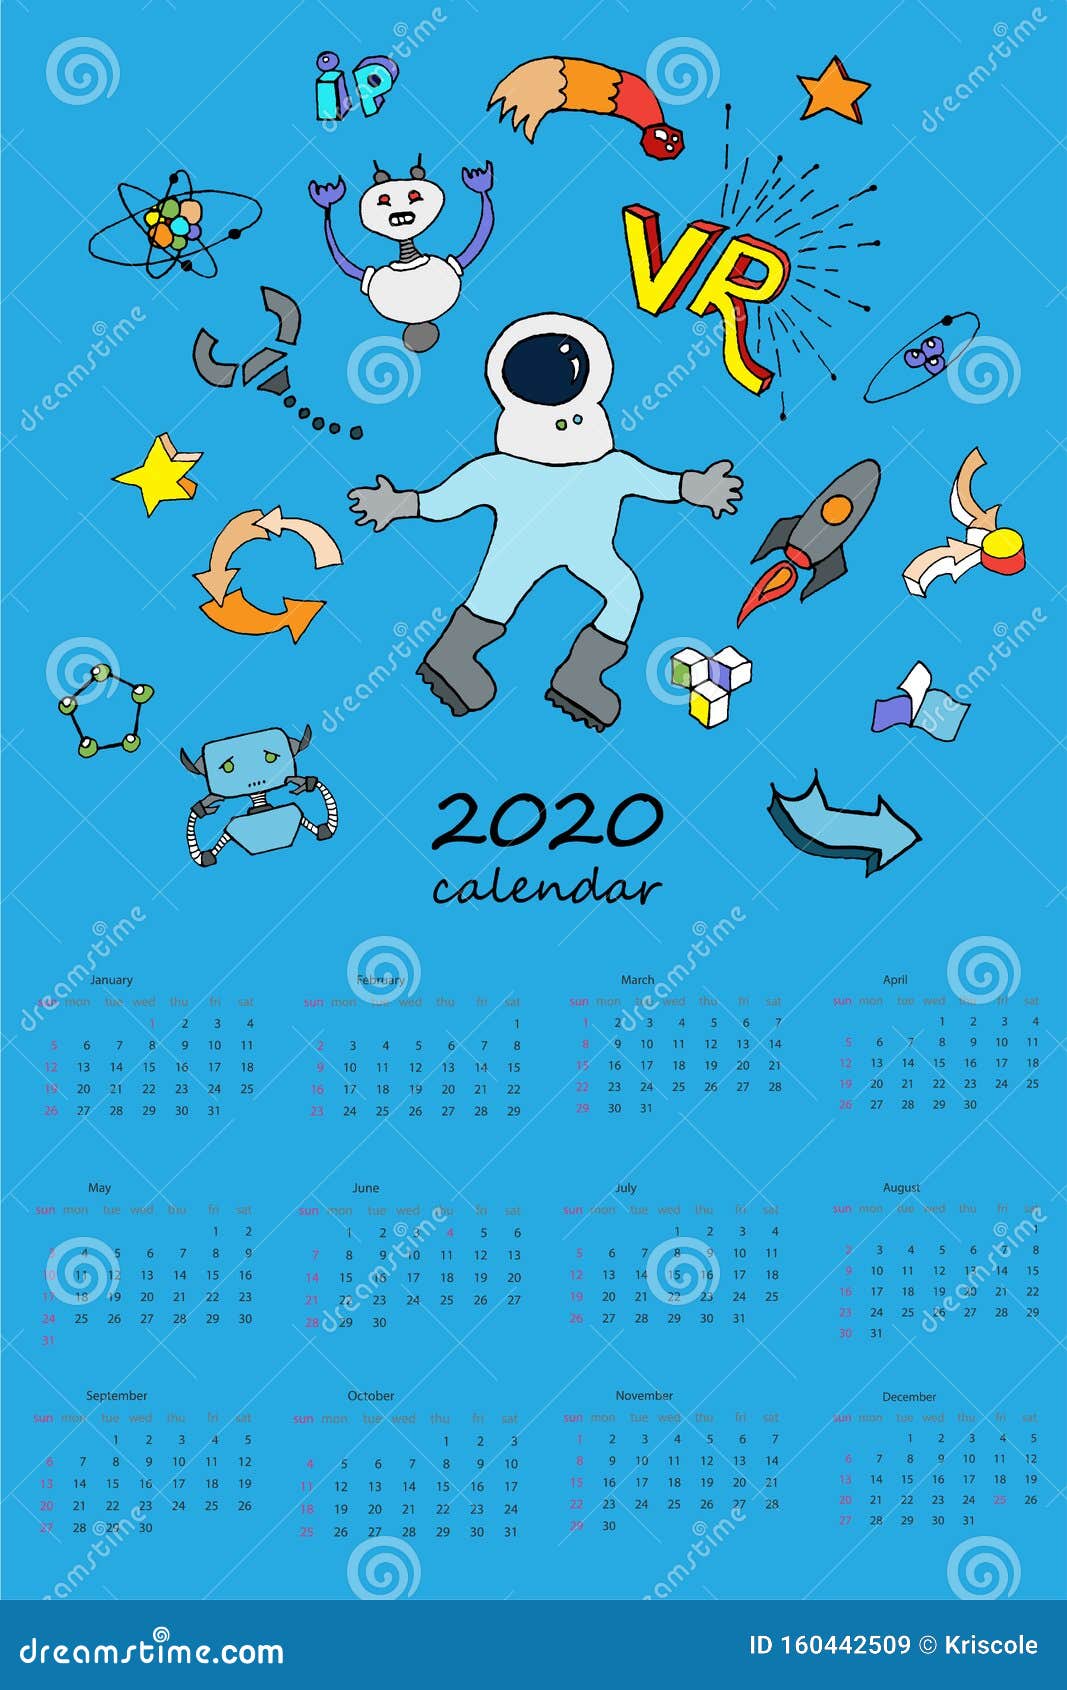 Print For Wall Calendar 2020 With STEM Set Of